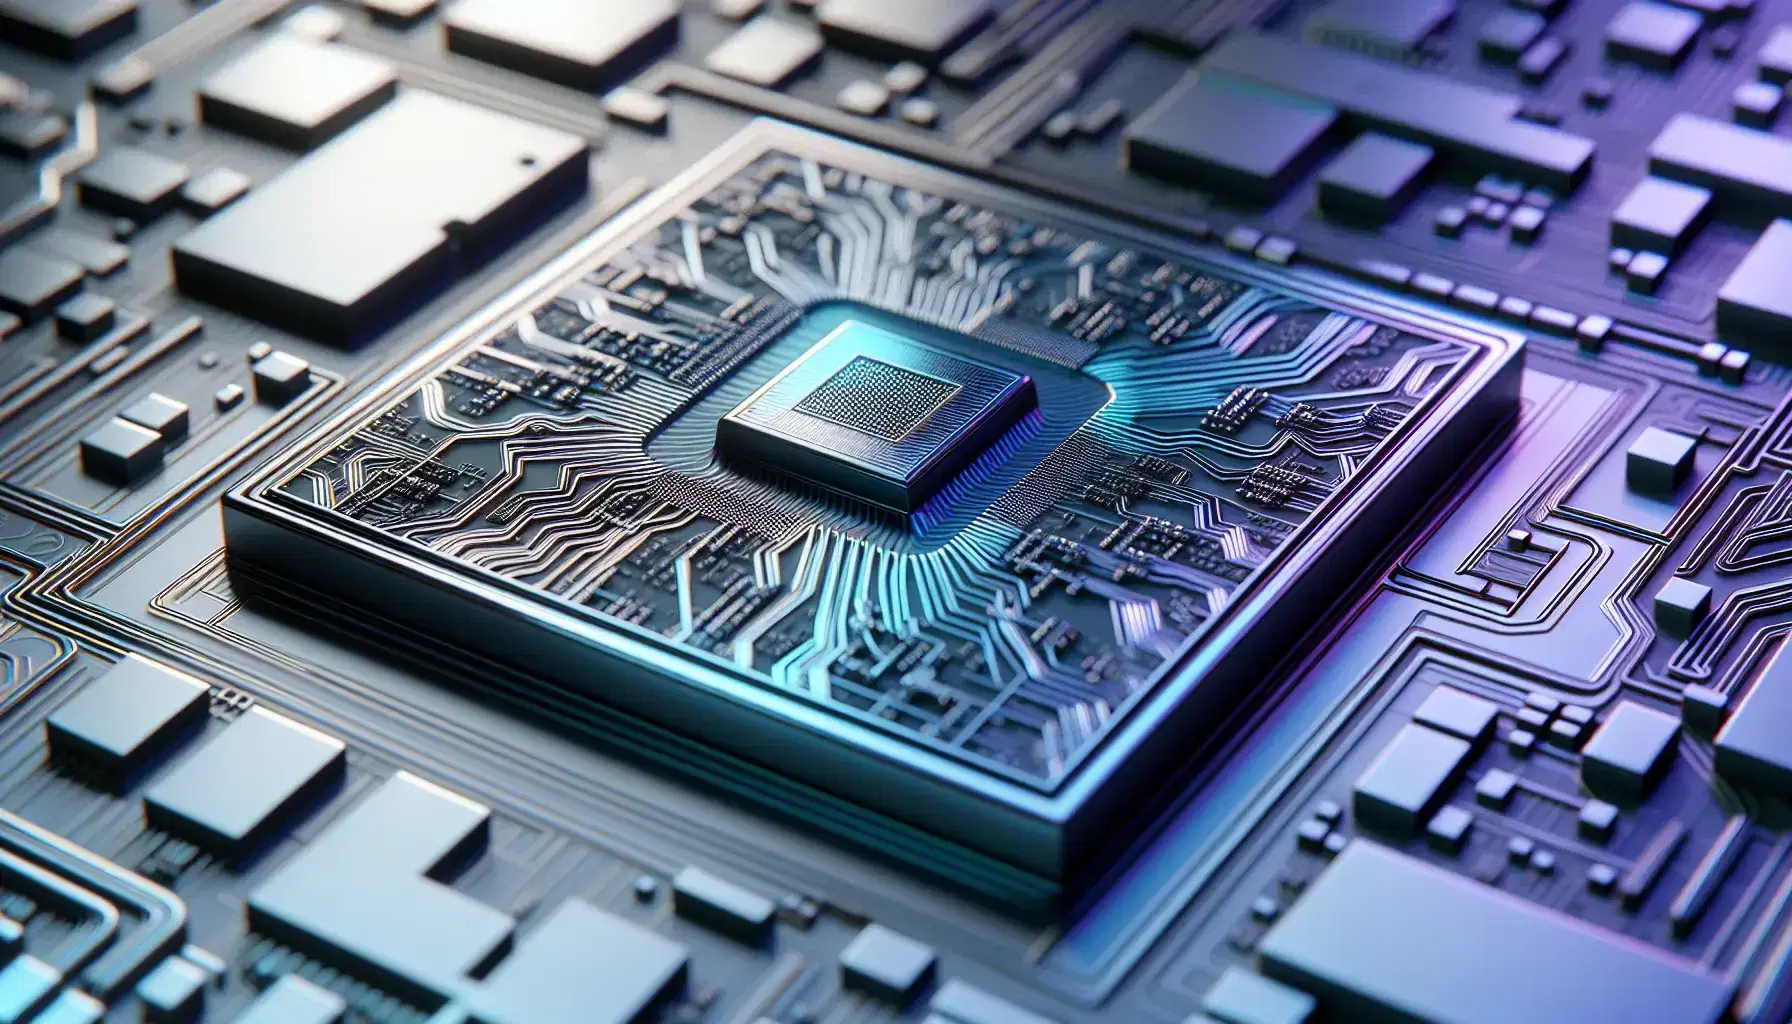 Close-up of a silicon microchip with etched circuitry and iridescent reflections in blue, purple and green on metal surface.